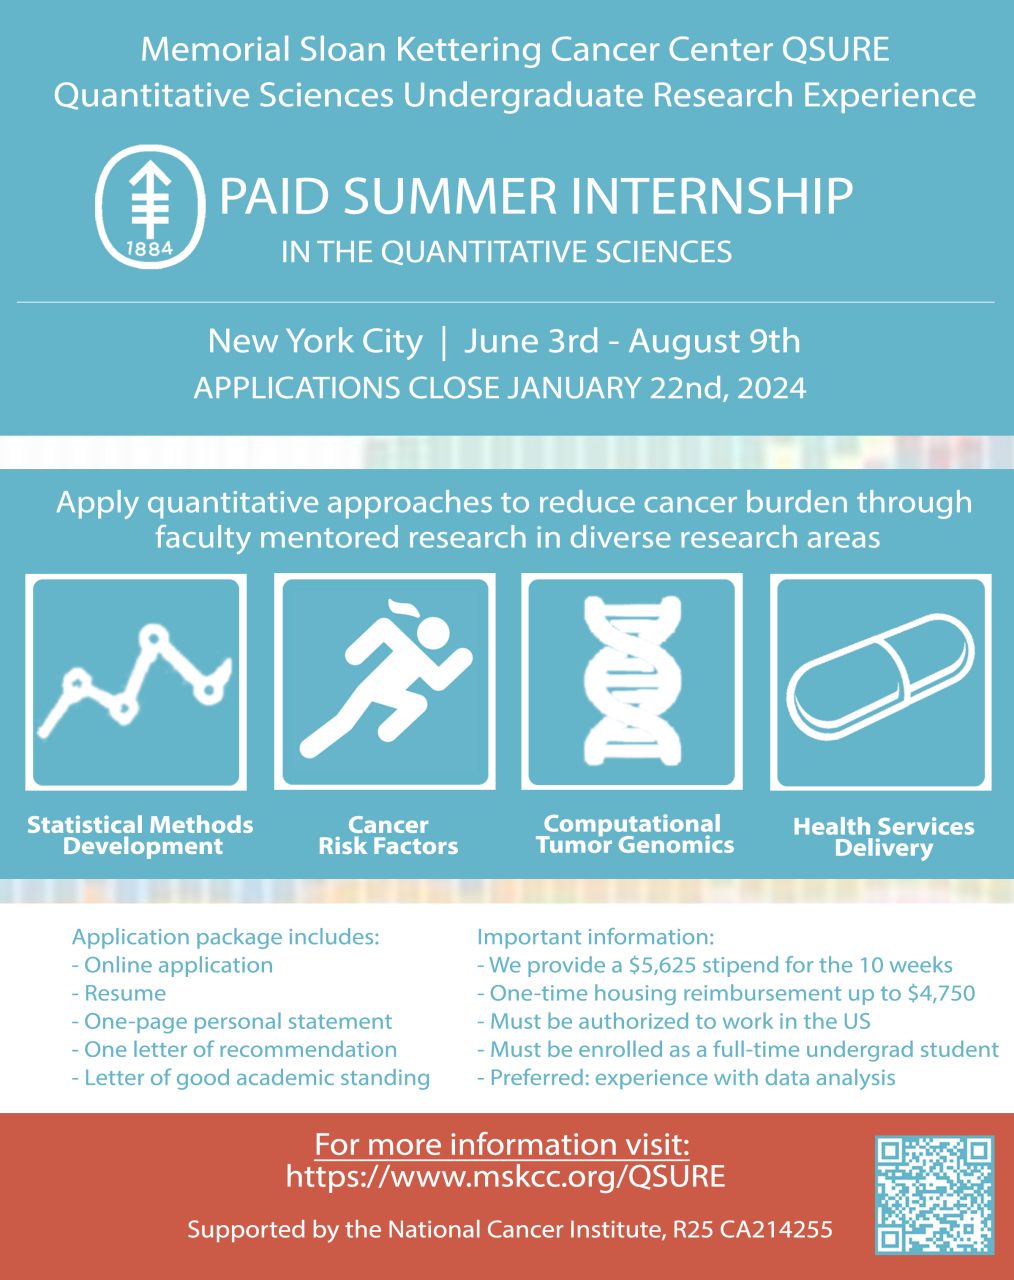 Aaron Mitchell: Undergrads interested in cancer research and data science – come spend your summer at MSKCC!